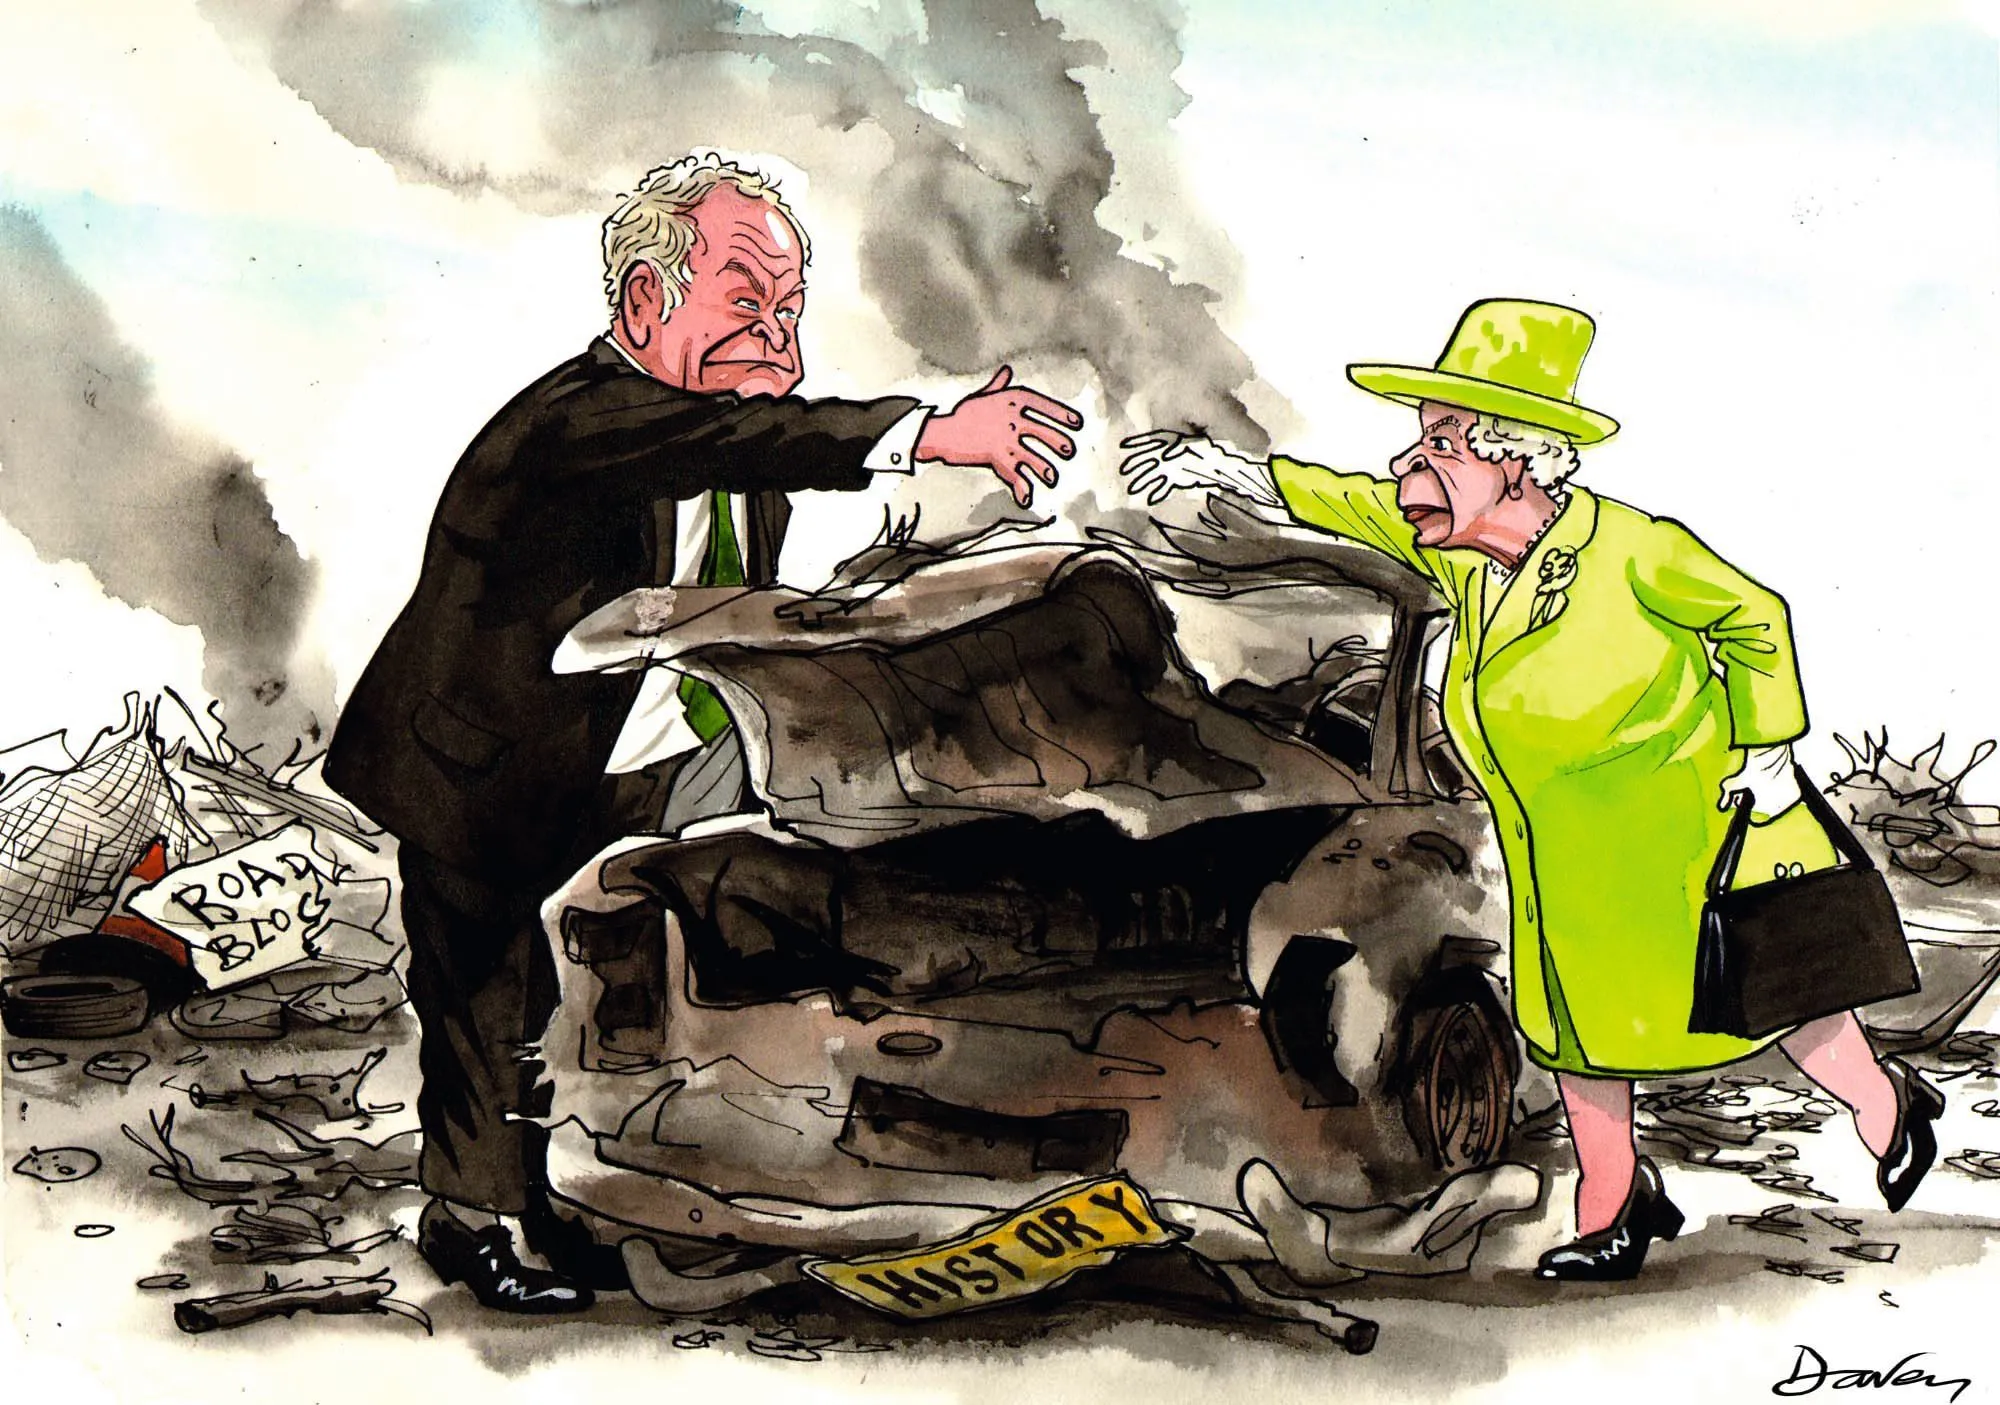 The Queen and Martin McGuinness shaking hands in 2012, Andy Daven, 2012.